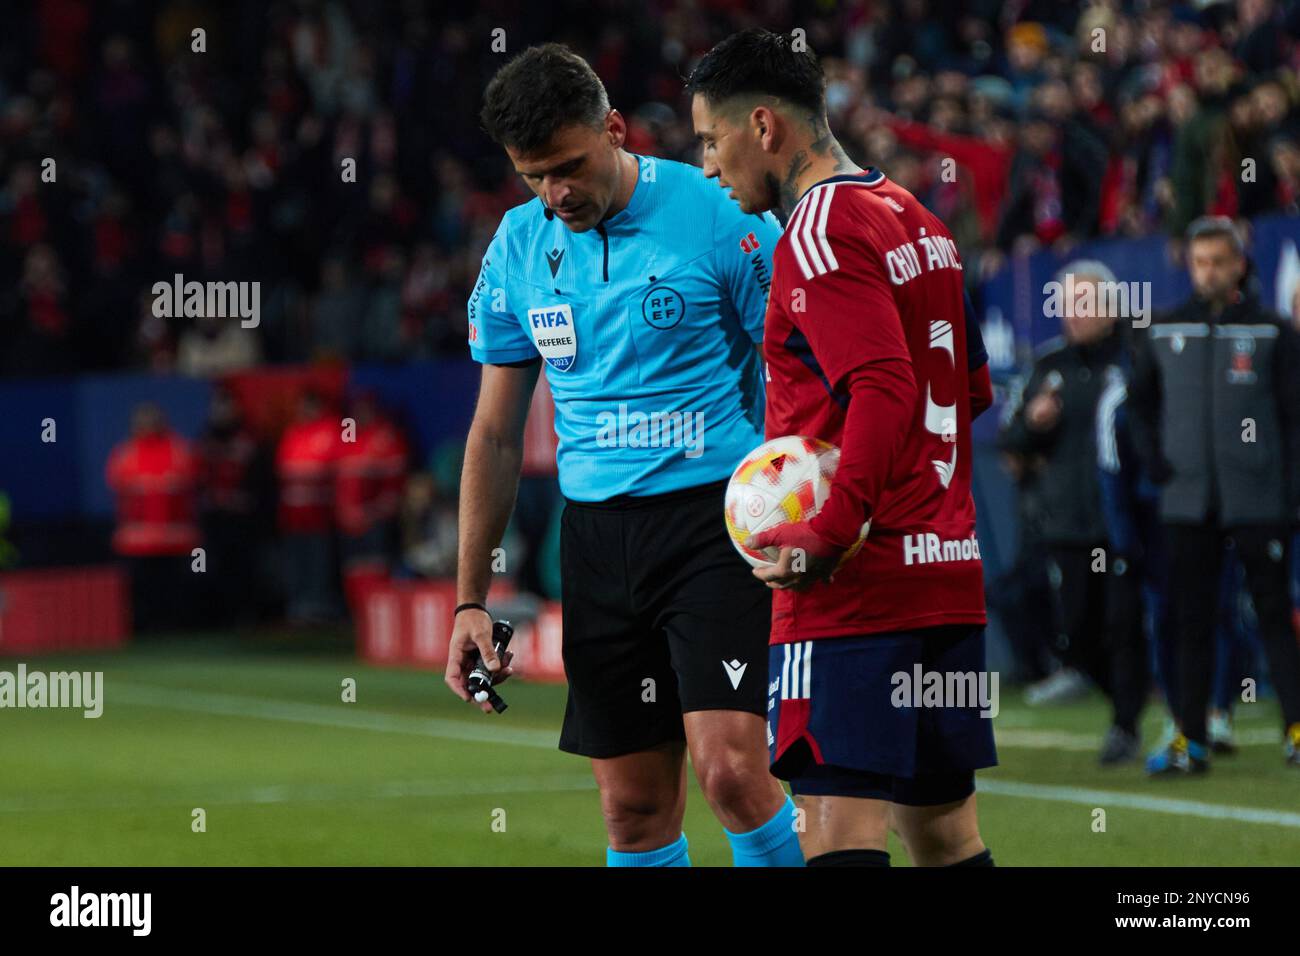 Pamplona, Spain. 1st Mar. 2023. Sports. Football/Soccer. Jesus Gil Manzano (match referee) and Chimy Avila (9. CA Osasuna) during the first leg football match of the semifinal of the Copa del Rey between CA Osasuna and Athletic Club played at El Sadar stadium in Pamplona (Spain) on March 1, 2023. Credit: Iñigo Alzugaray/Alamy Live News Stock Photo